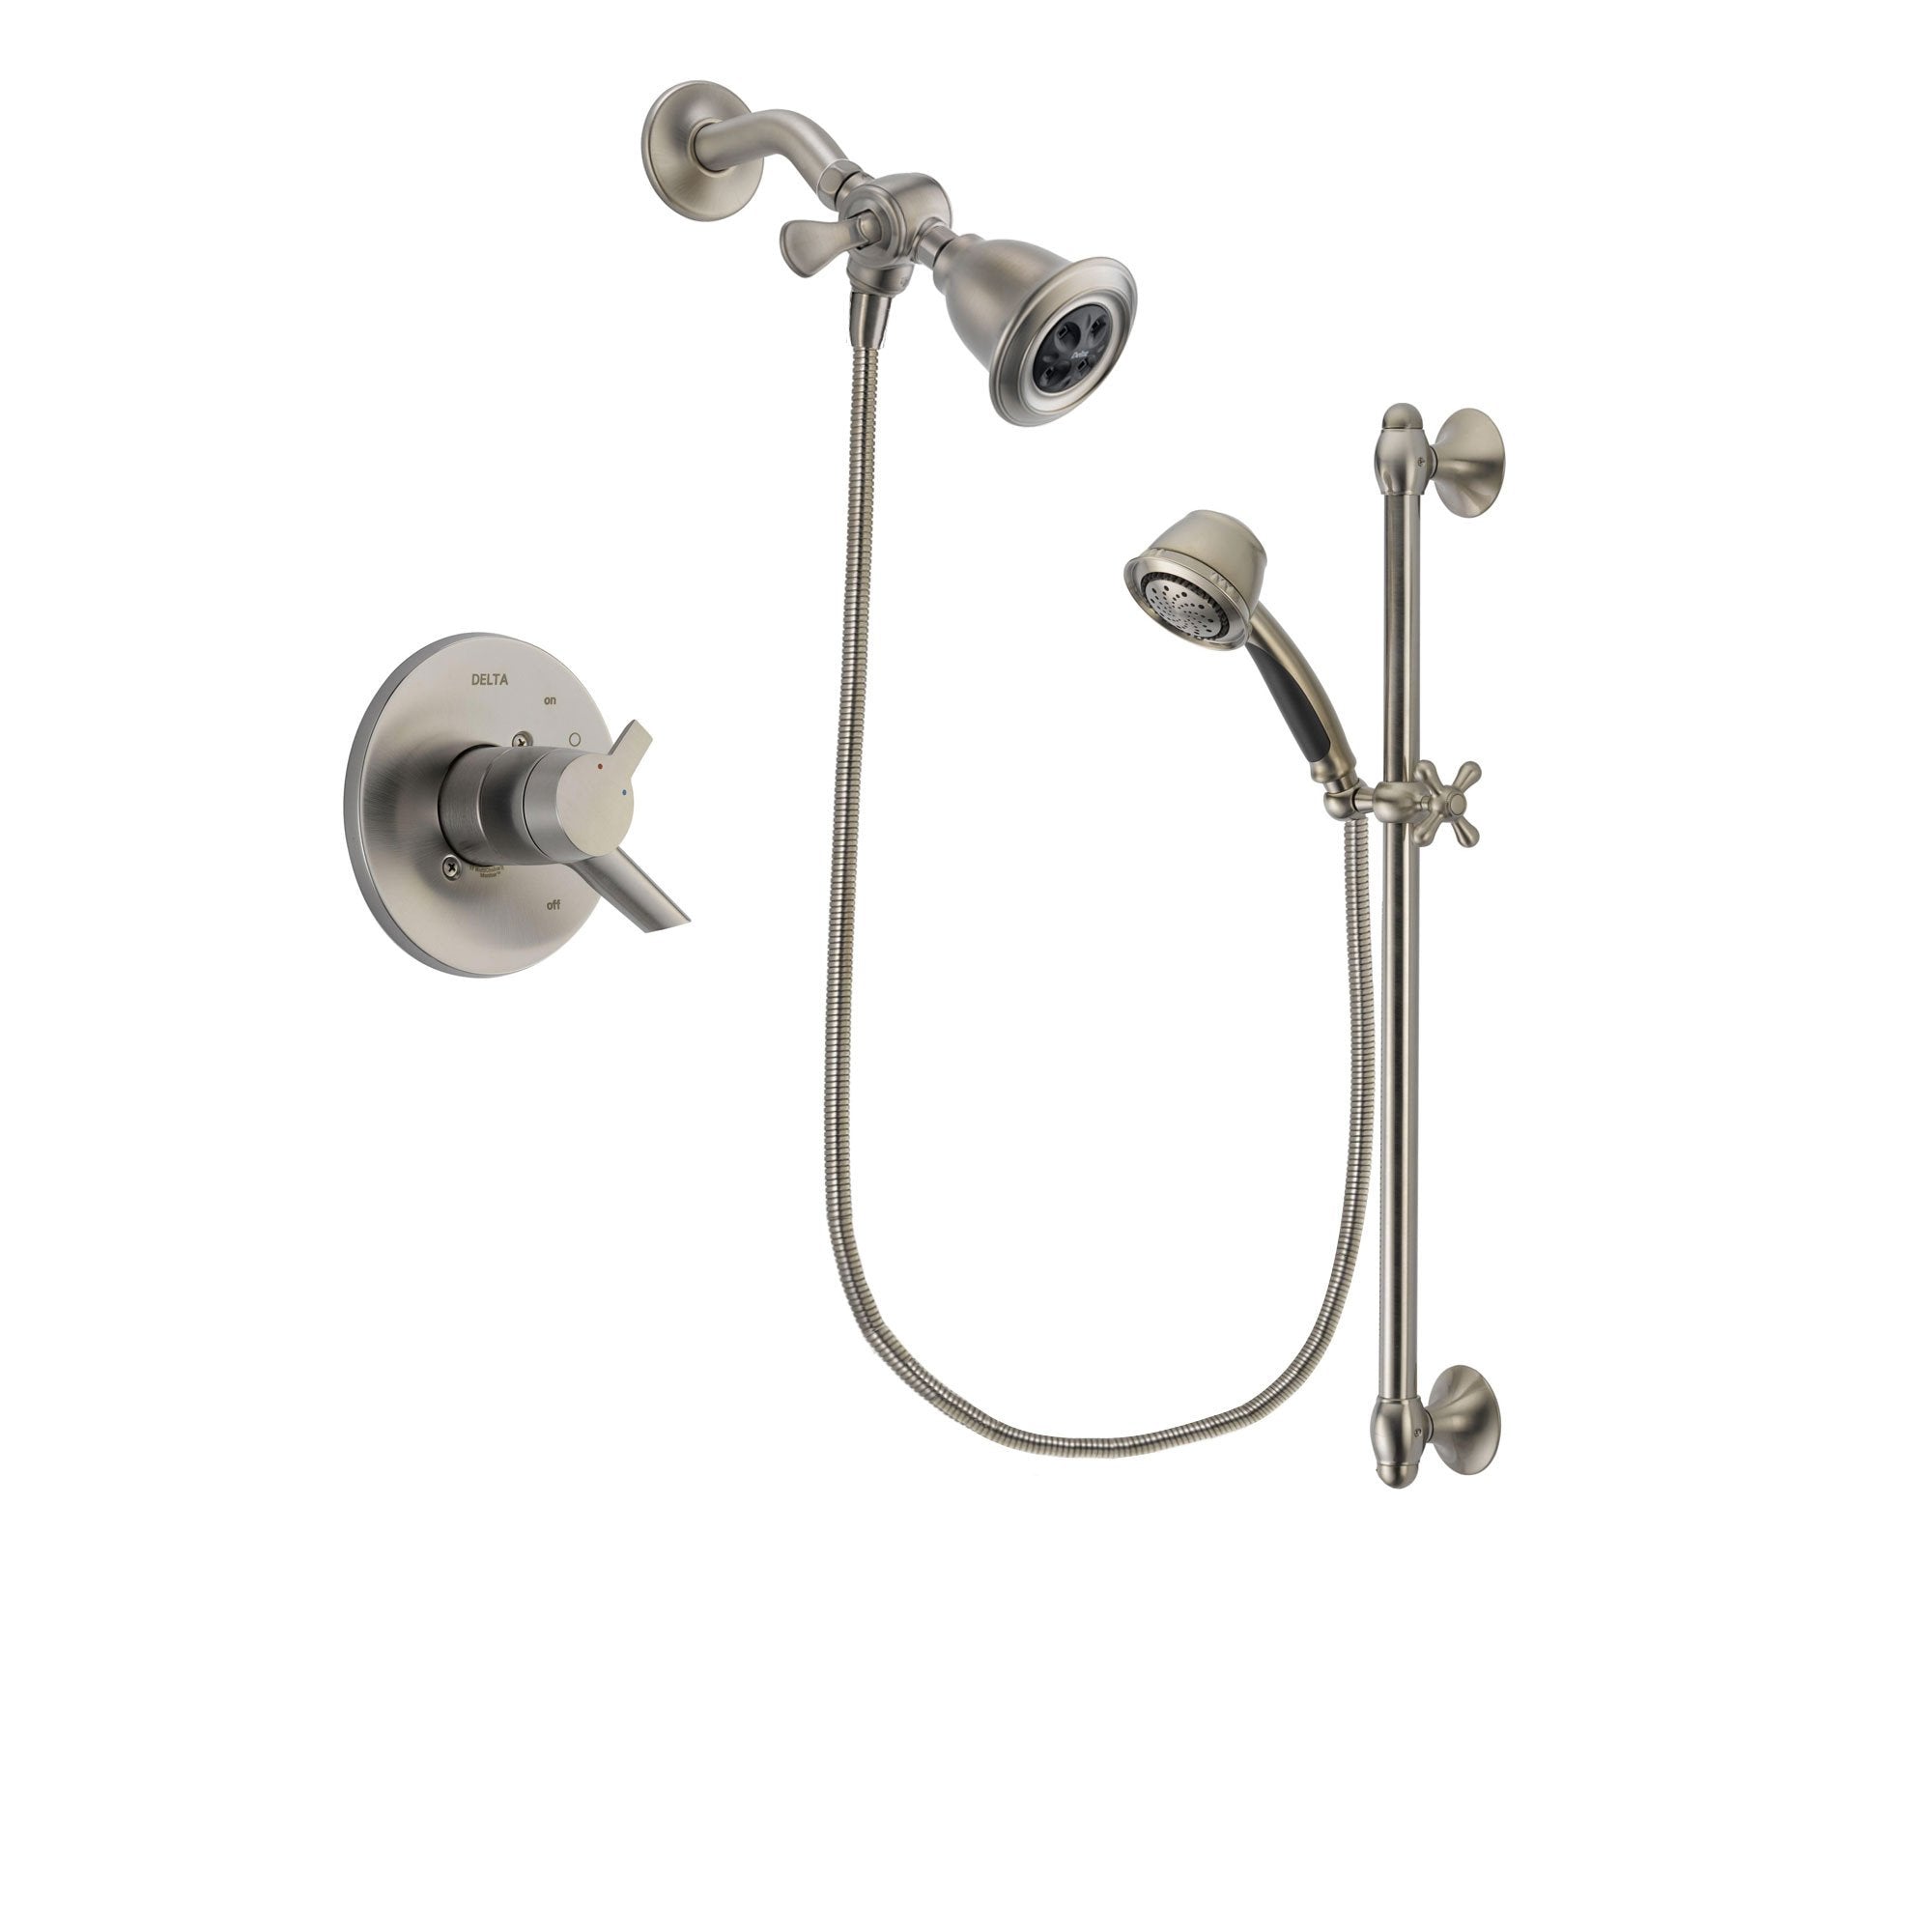 Delta Compel Stainless Steel Finish Dual Control Shower Faucet System Package with Water Efficient Showerhead and 5-Spray Personal Handshower with Slide Bar Includes Rough-in Valve DSP1300V